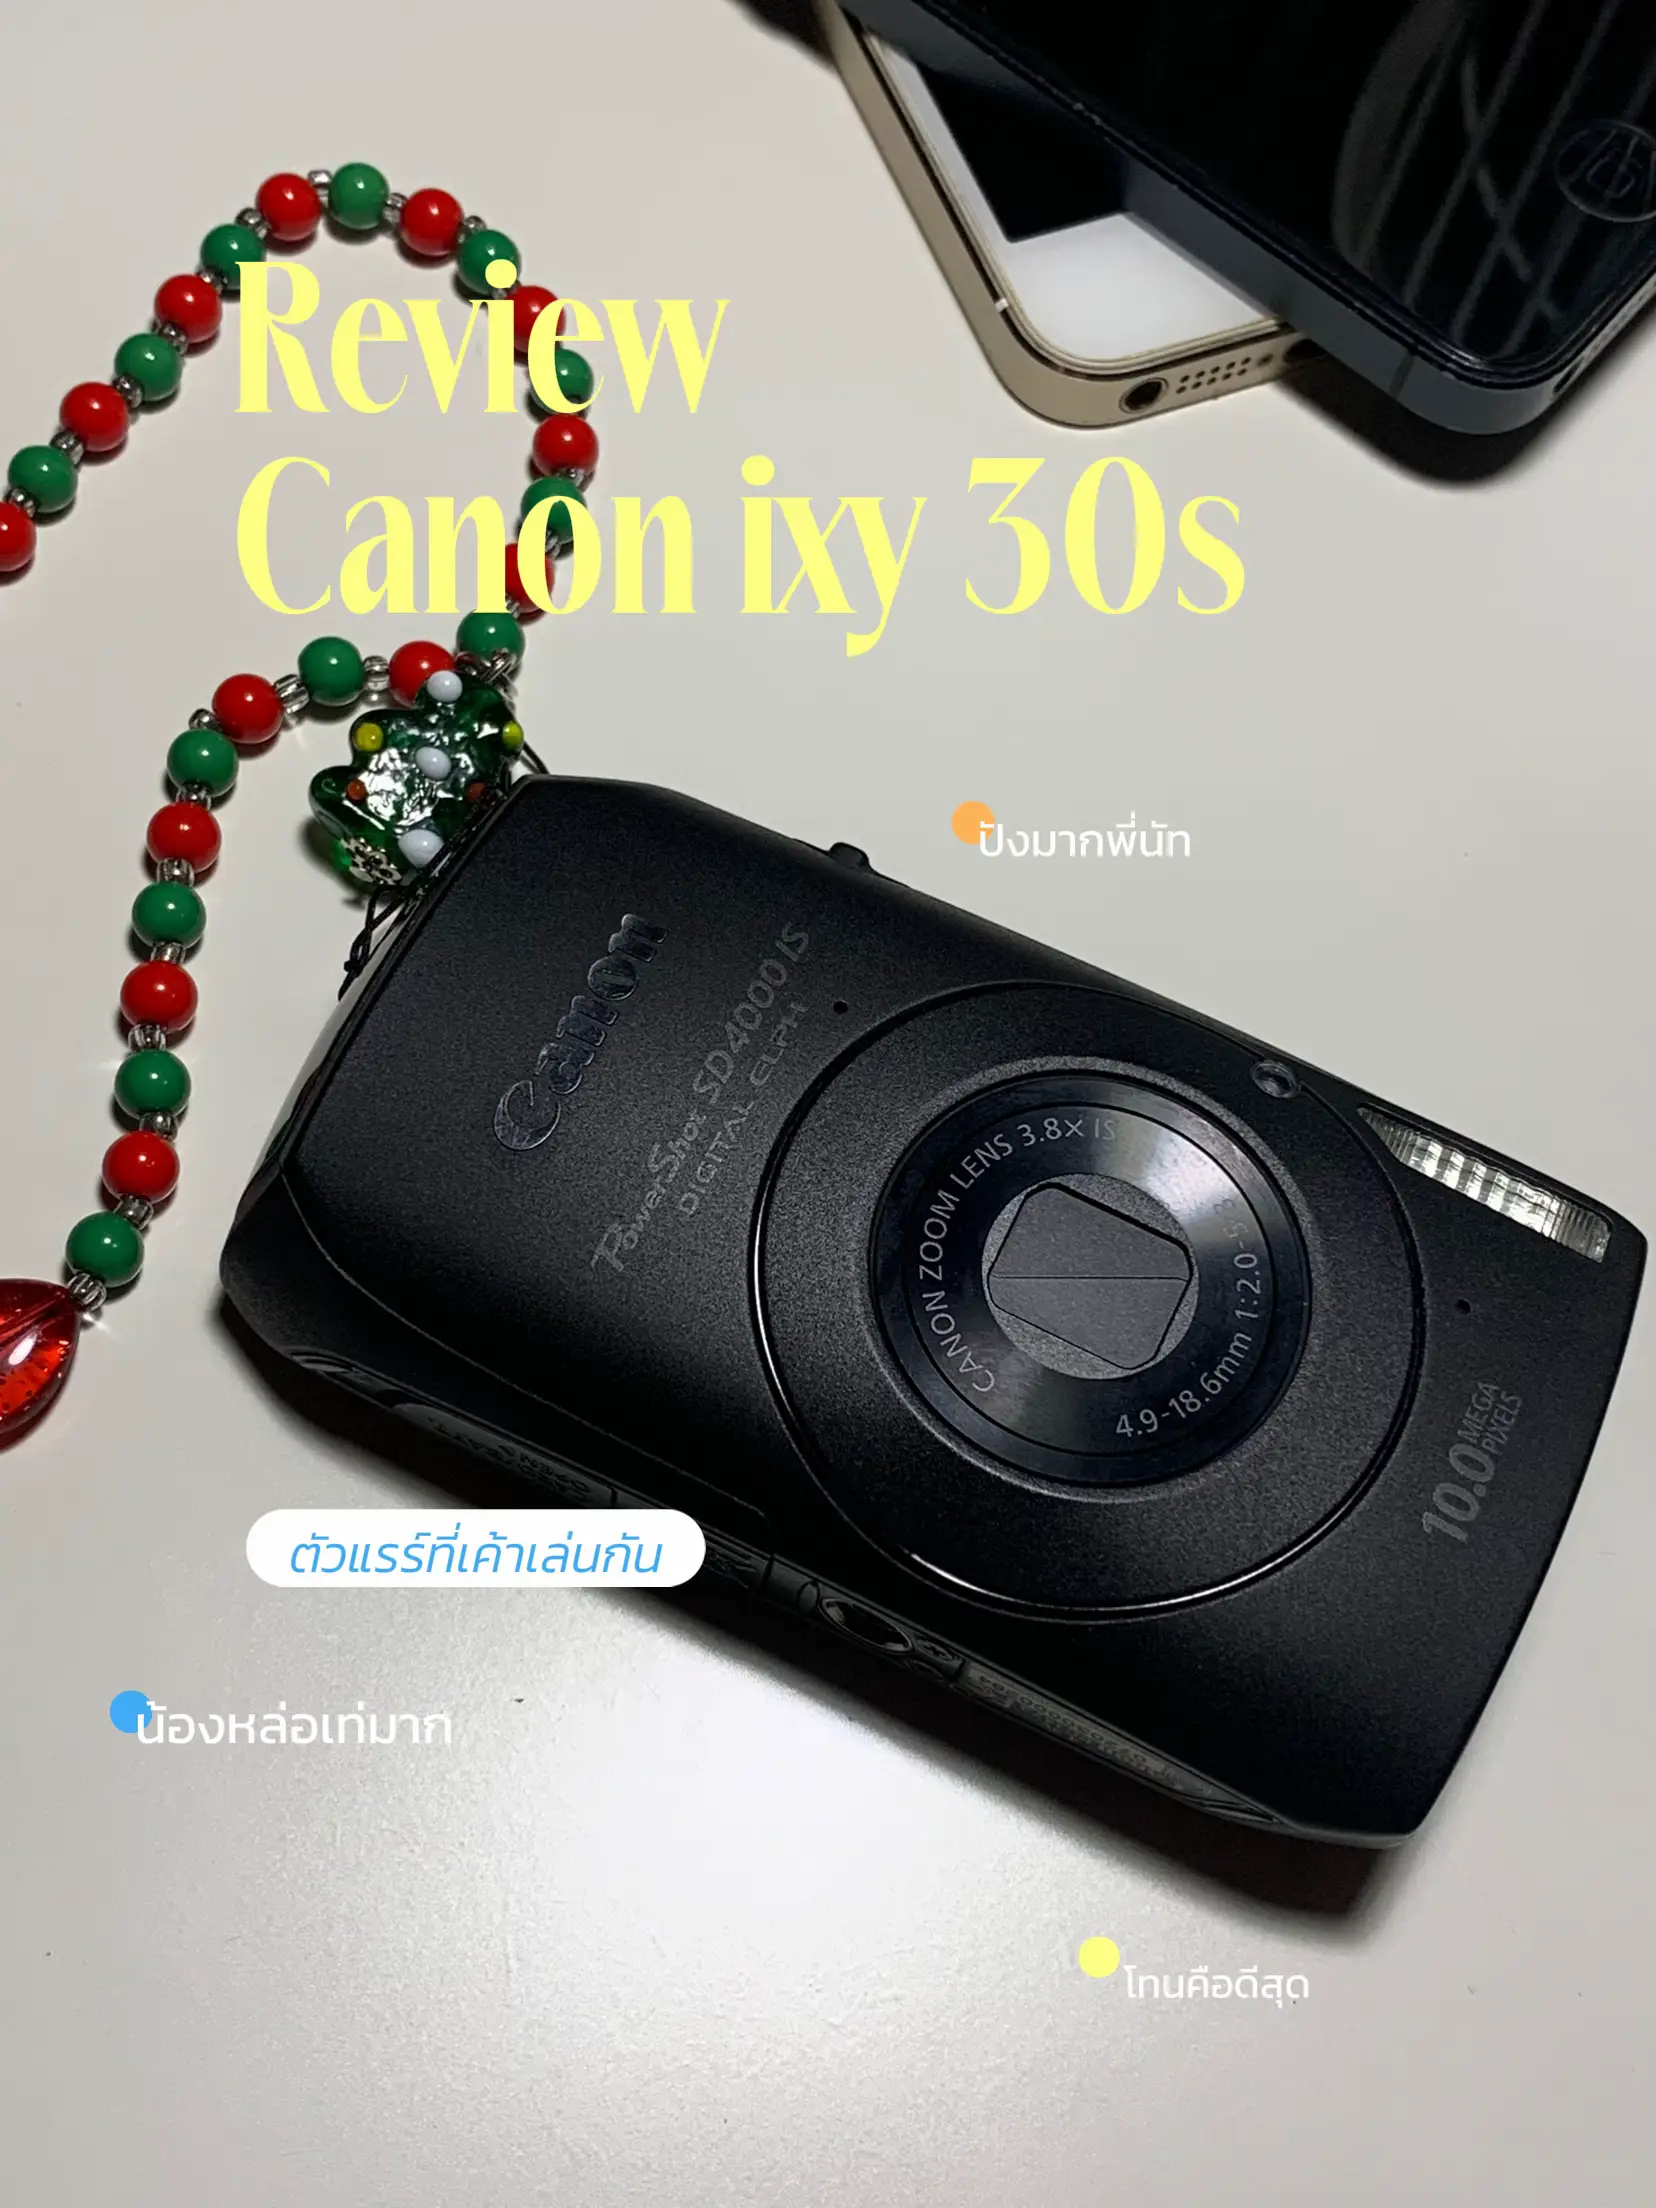 Canon Ixy 30s really reviewed the view. | Gallery posted by PLUEM